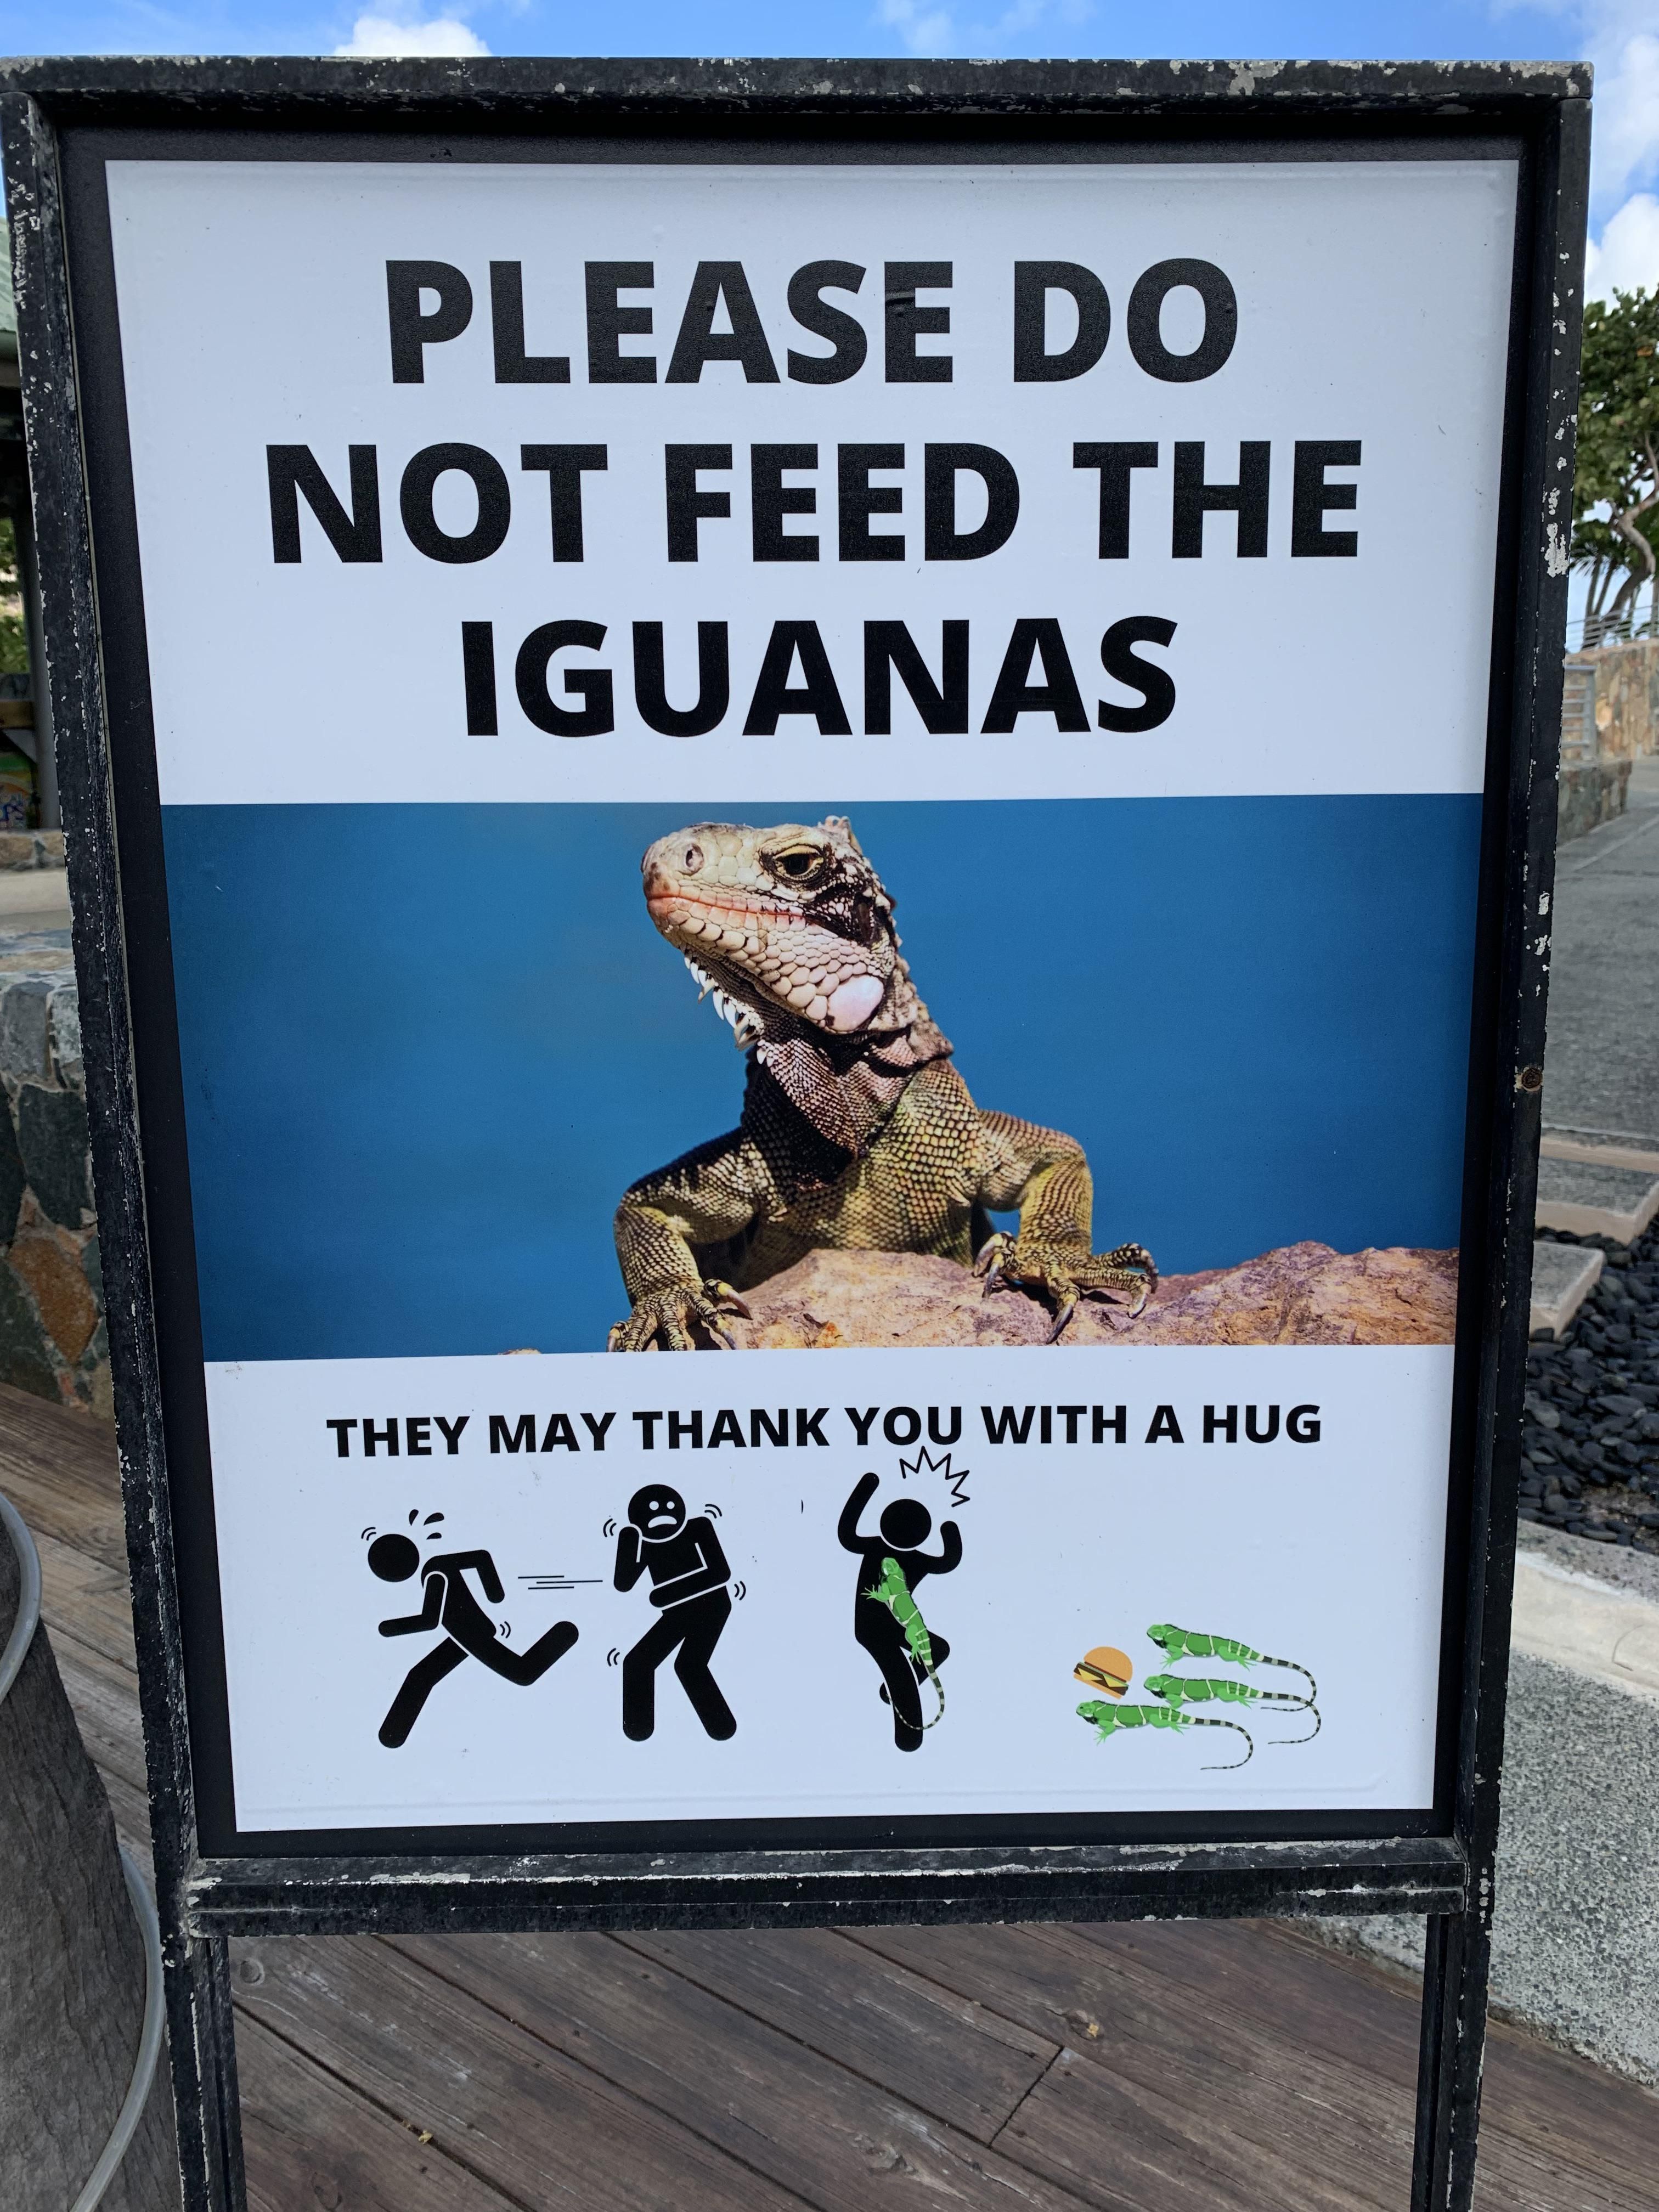 Sign I saw in the Virgin Island